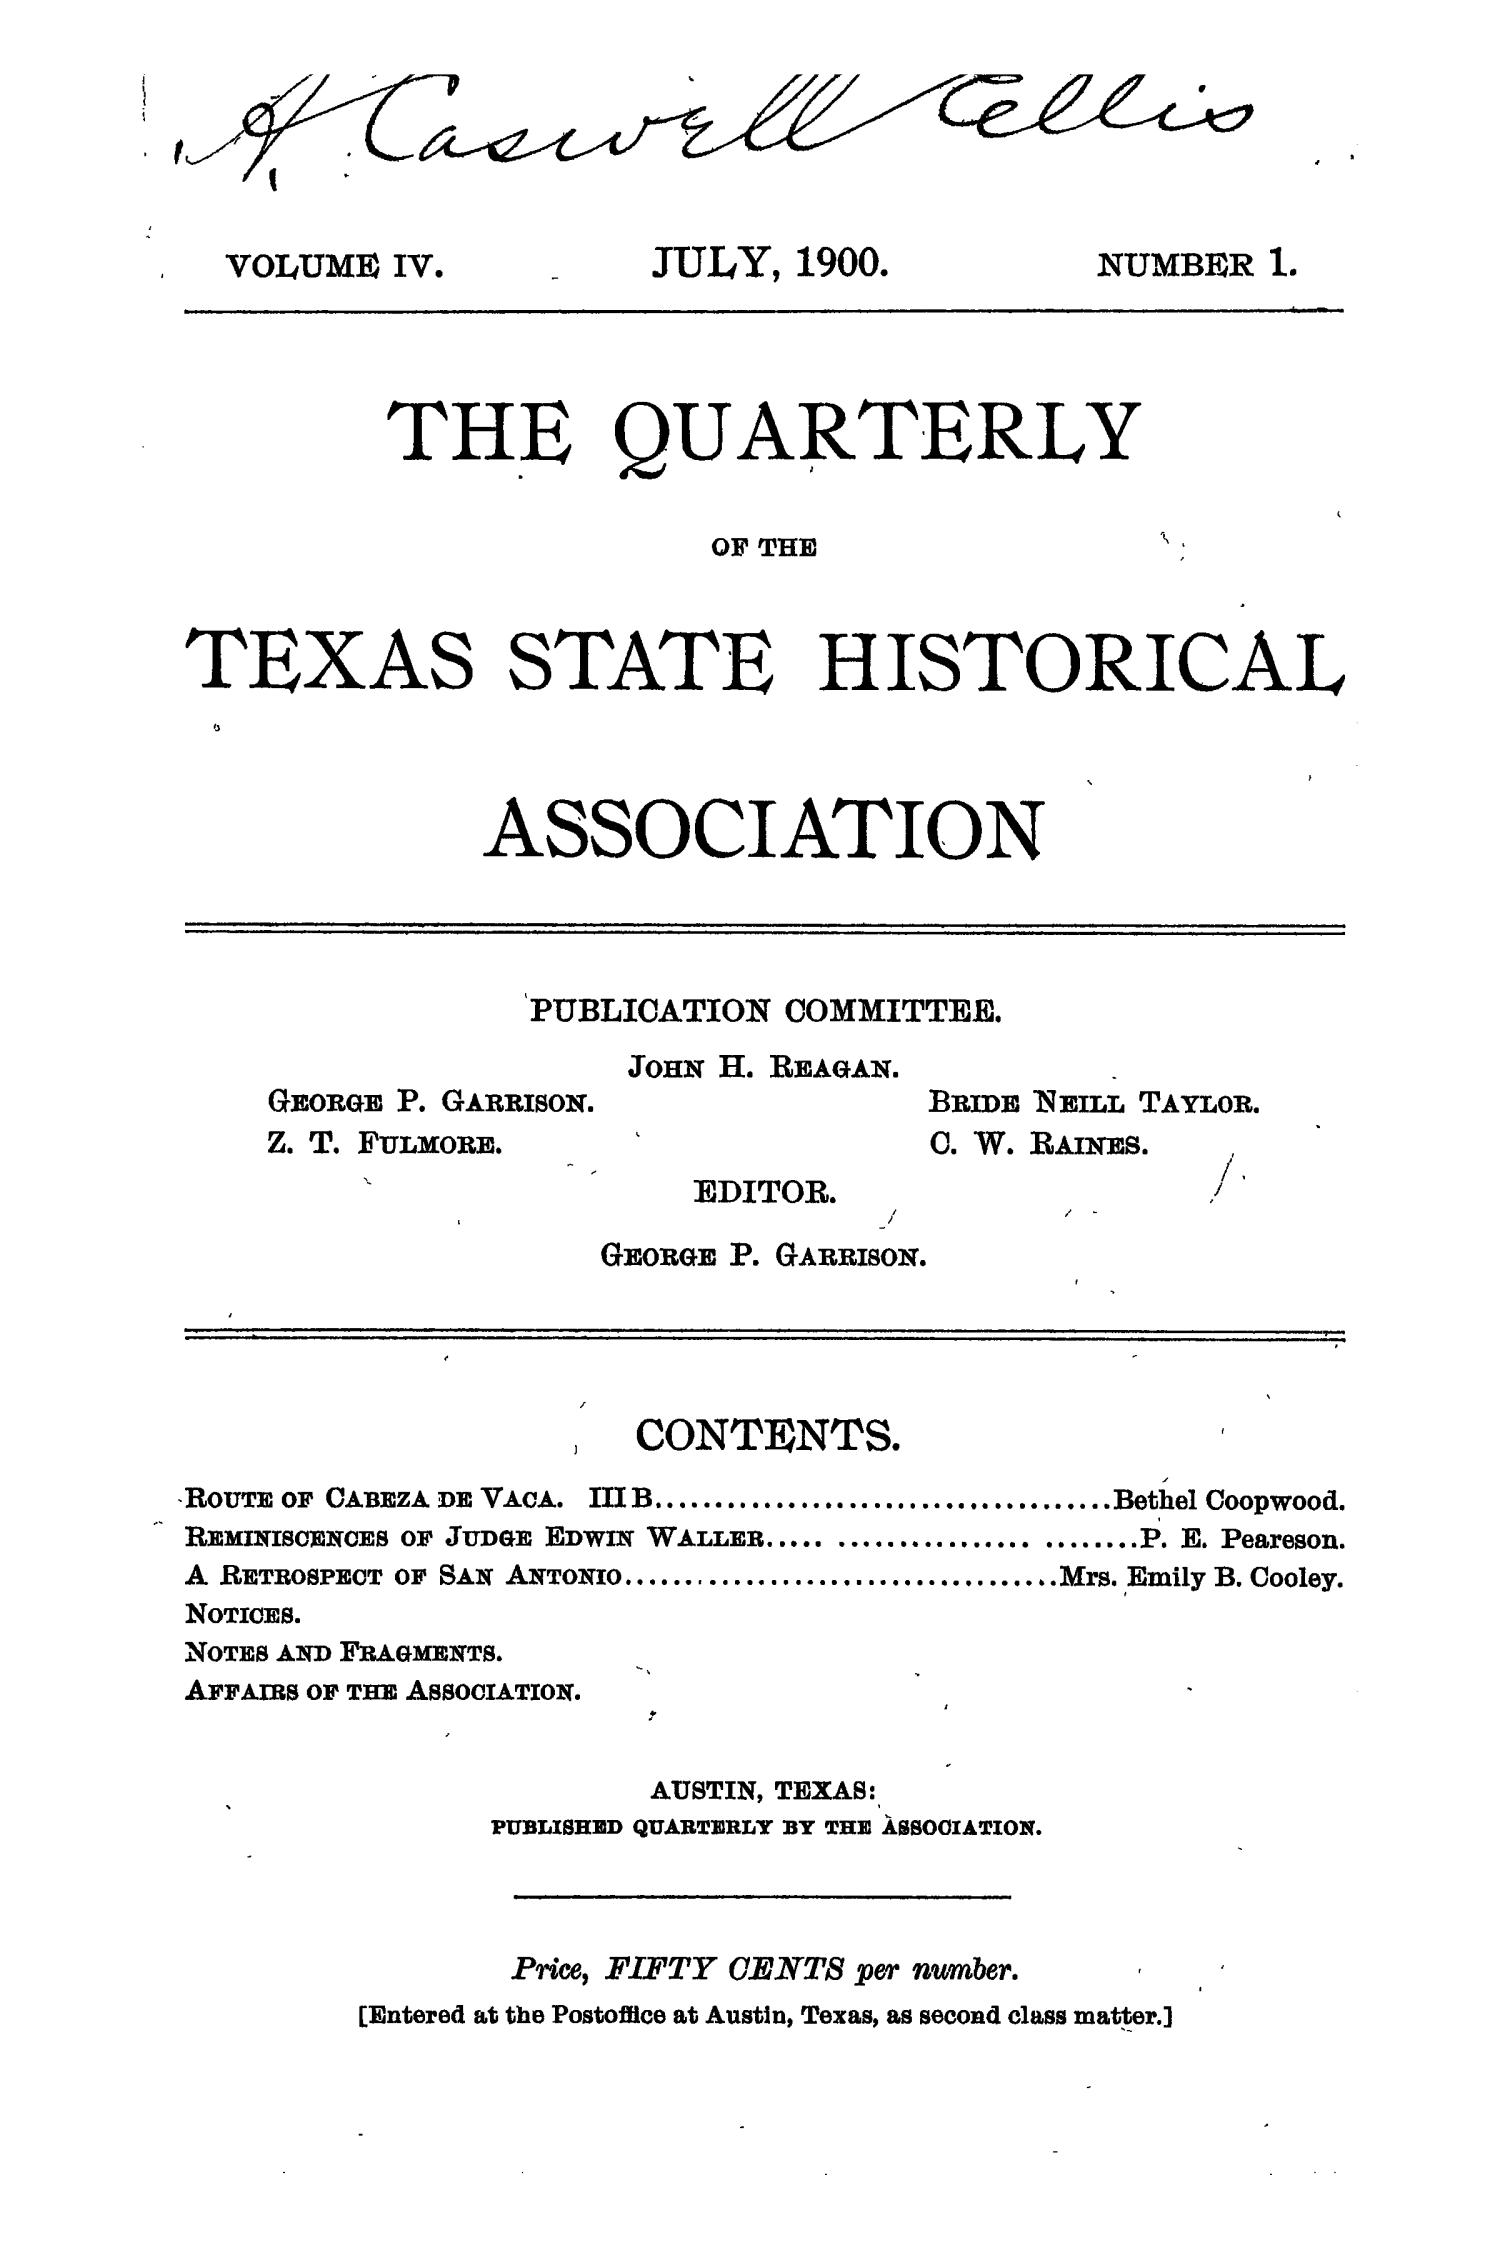 The Quarterly of the Texas State Historical Association, Volume 4, July 1900 - April, 1901
                                                
                                                    None
                                                